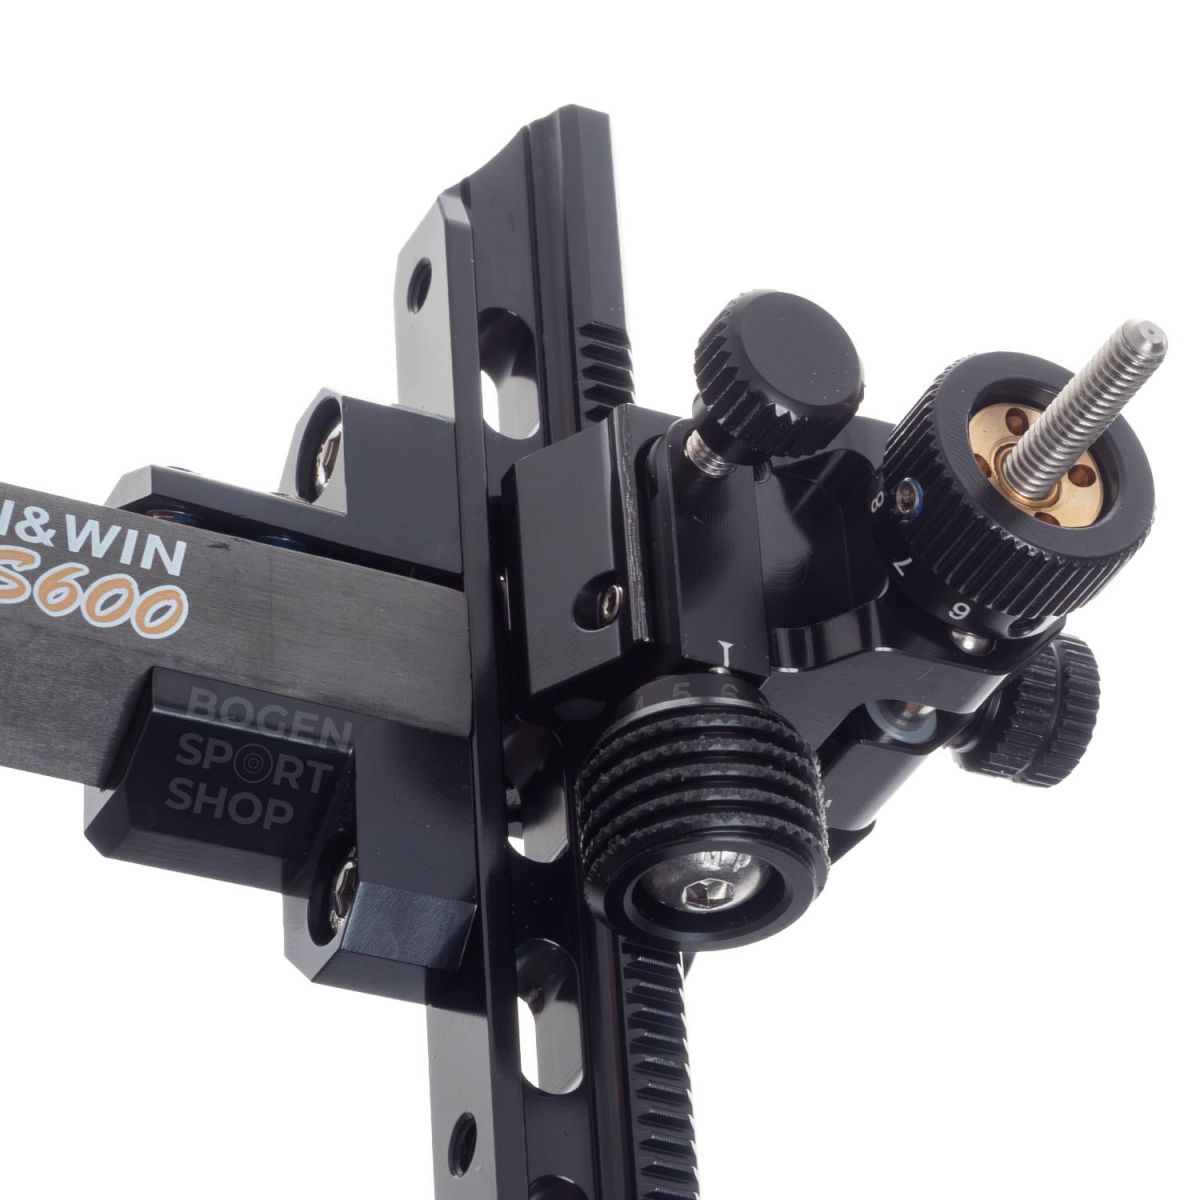 Win&Win Sight Carbon WS600